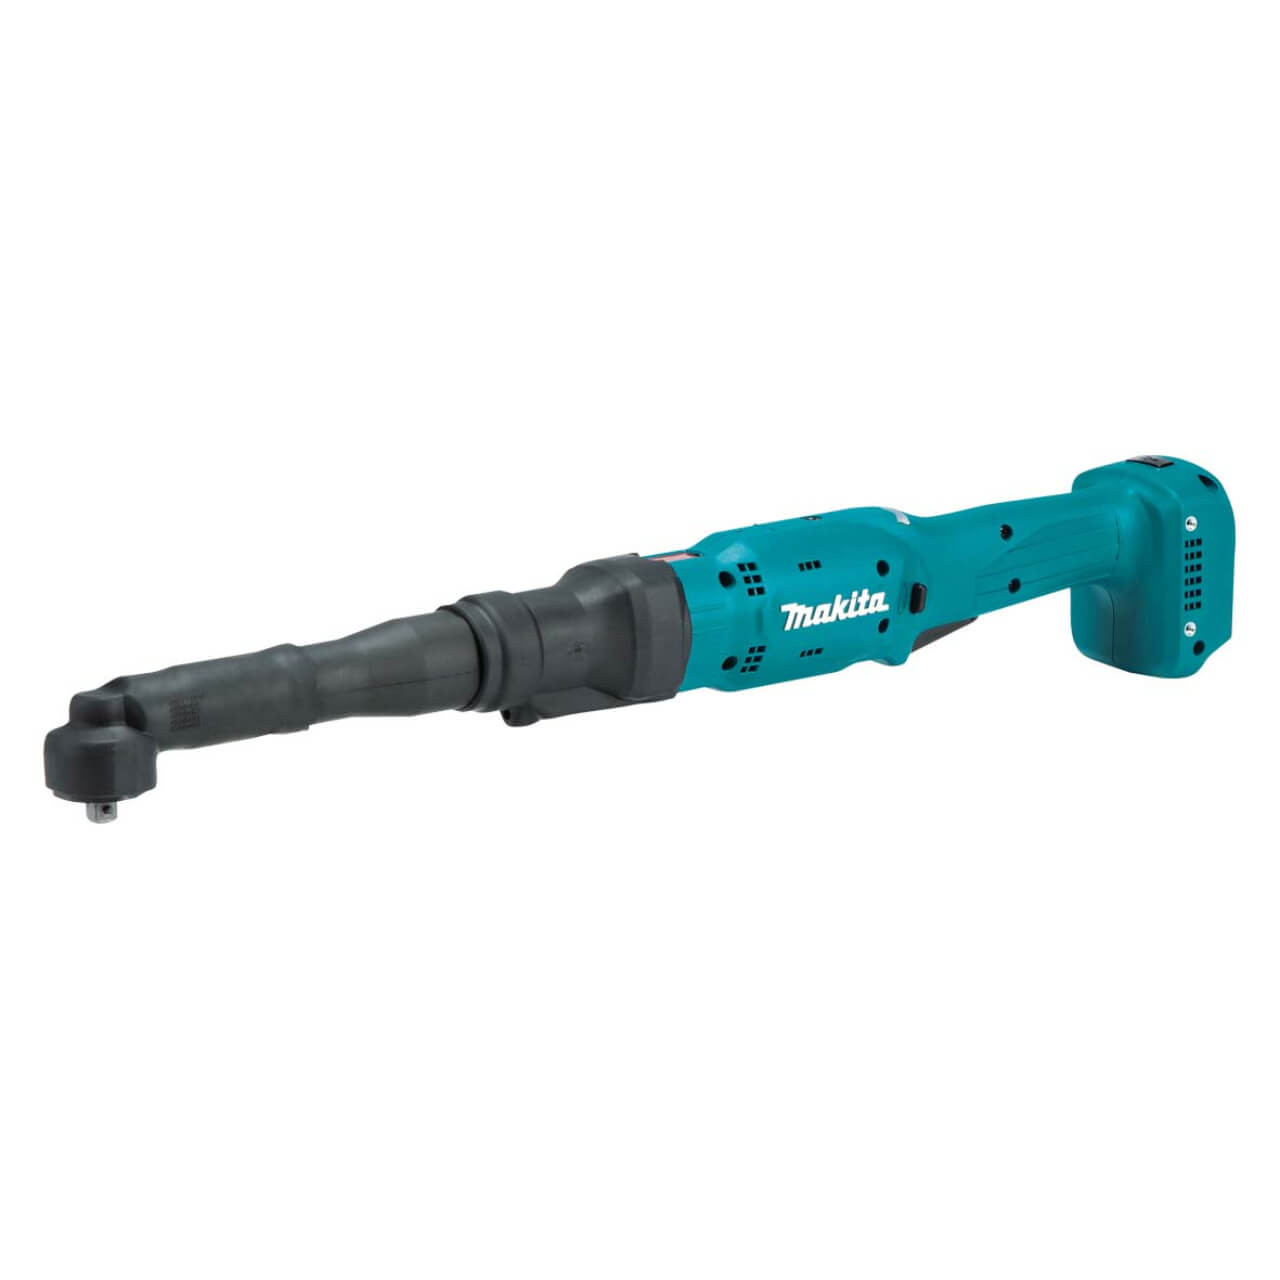 Makita 18V BRUSHLESS 3/8” Angled Torque Wrench. 25-65Nm. 80-200rpm - Tool Only